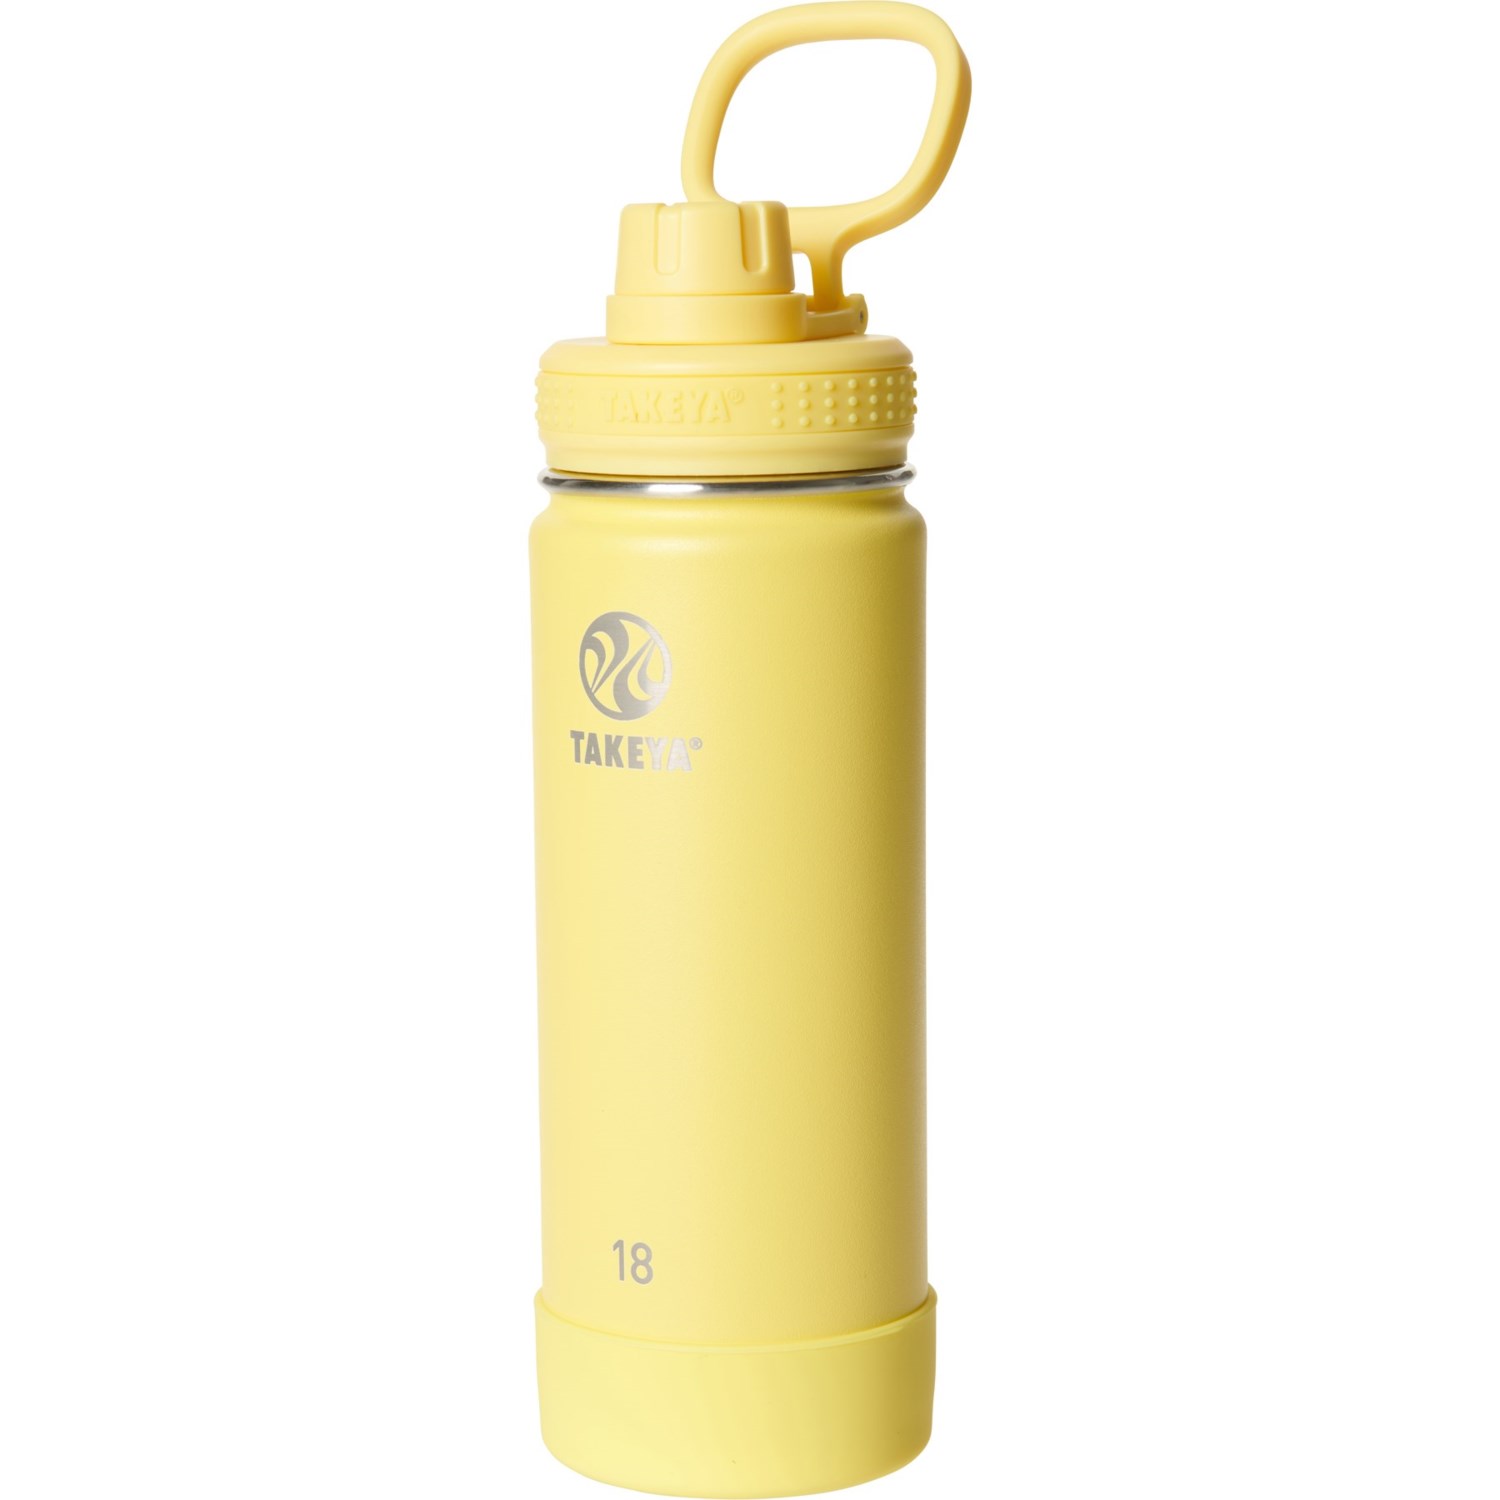 https://i.stpost.com/takeya-actives-insulated-water-bottle-with-spout-lid-18-oz-in-canary~p~1nhat_02~1500.2.jpg